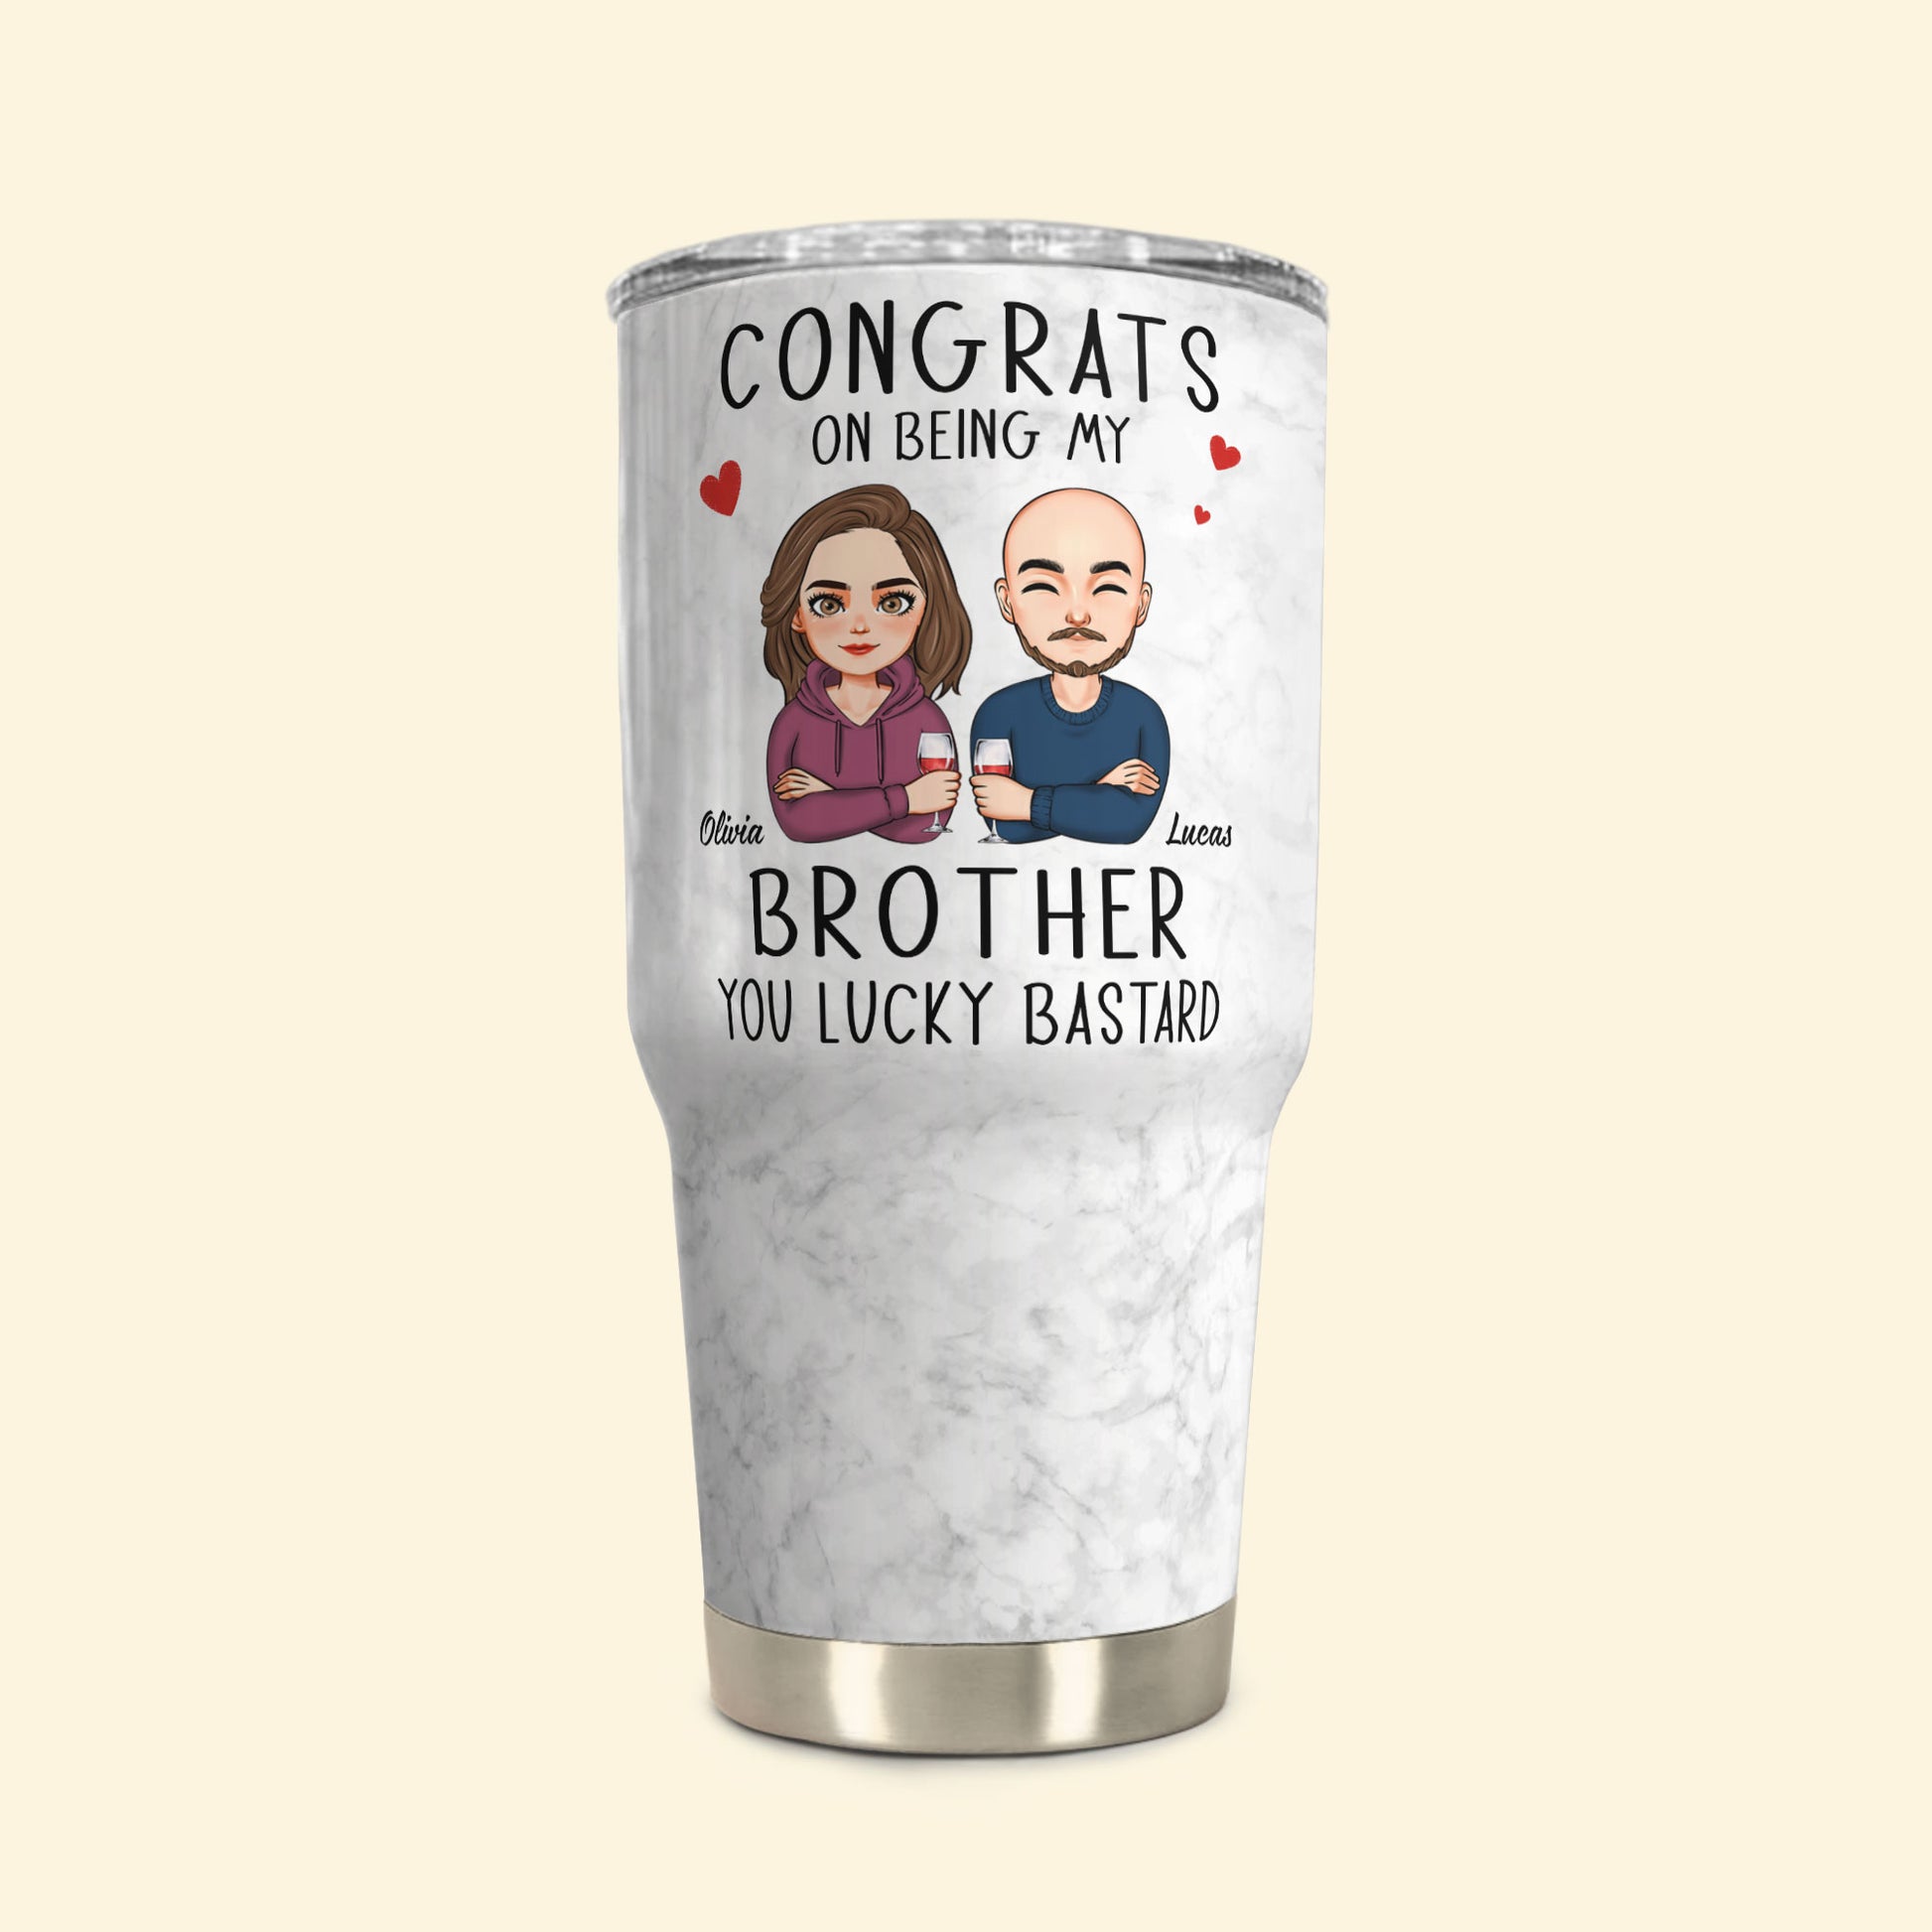 https://macorner.co/cdn/shop/files/Congrats-On-Being-My-Sibling-Personalized-30oz-Tumbler-With-Straw-4.jpg?v=1692960828&width=1946